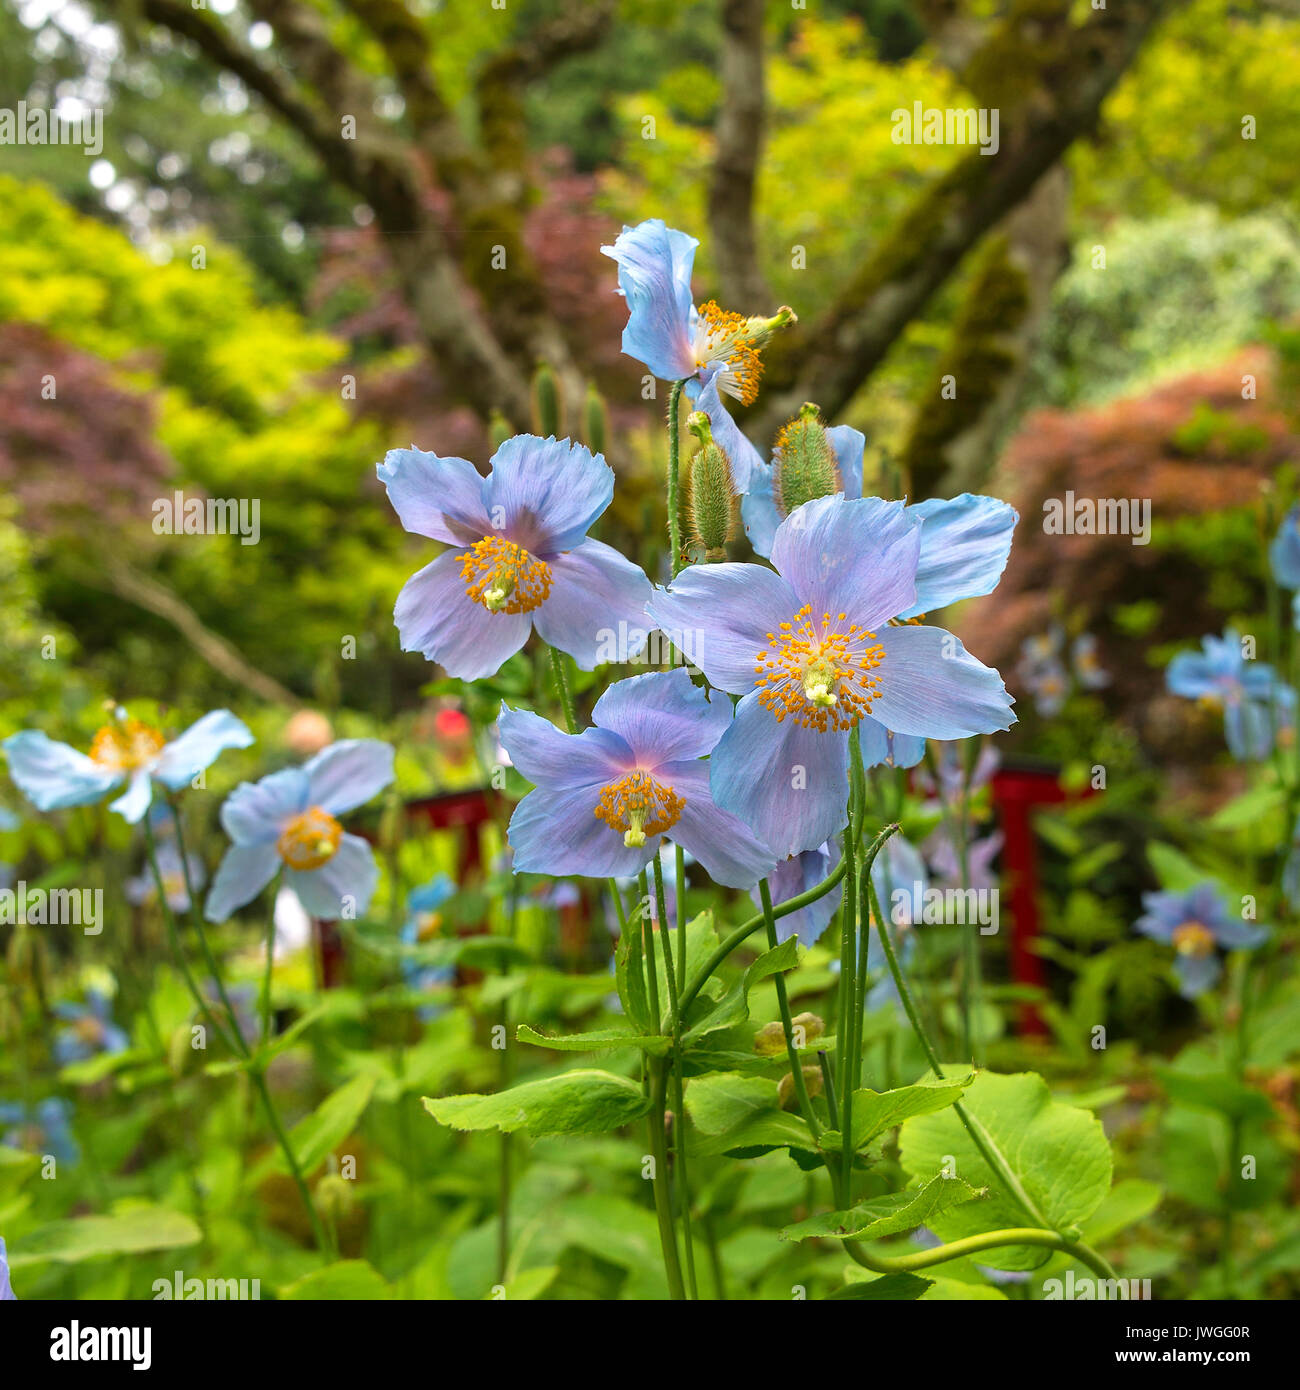 Beautiful Pale Blue Poppy Flowers Meconopsis Baileyi in the Japanese Garden at Butchart Gardens Victoria Vancouver Island British Columbia Canada Stock Photo